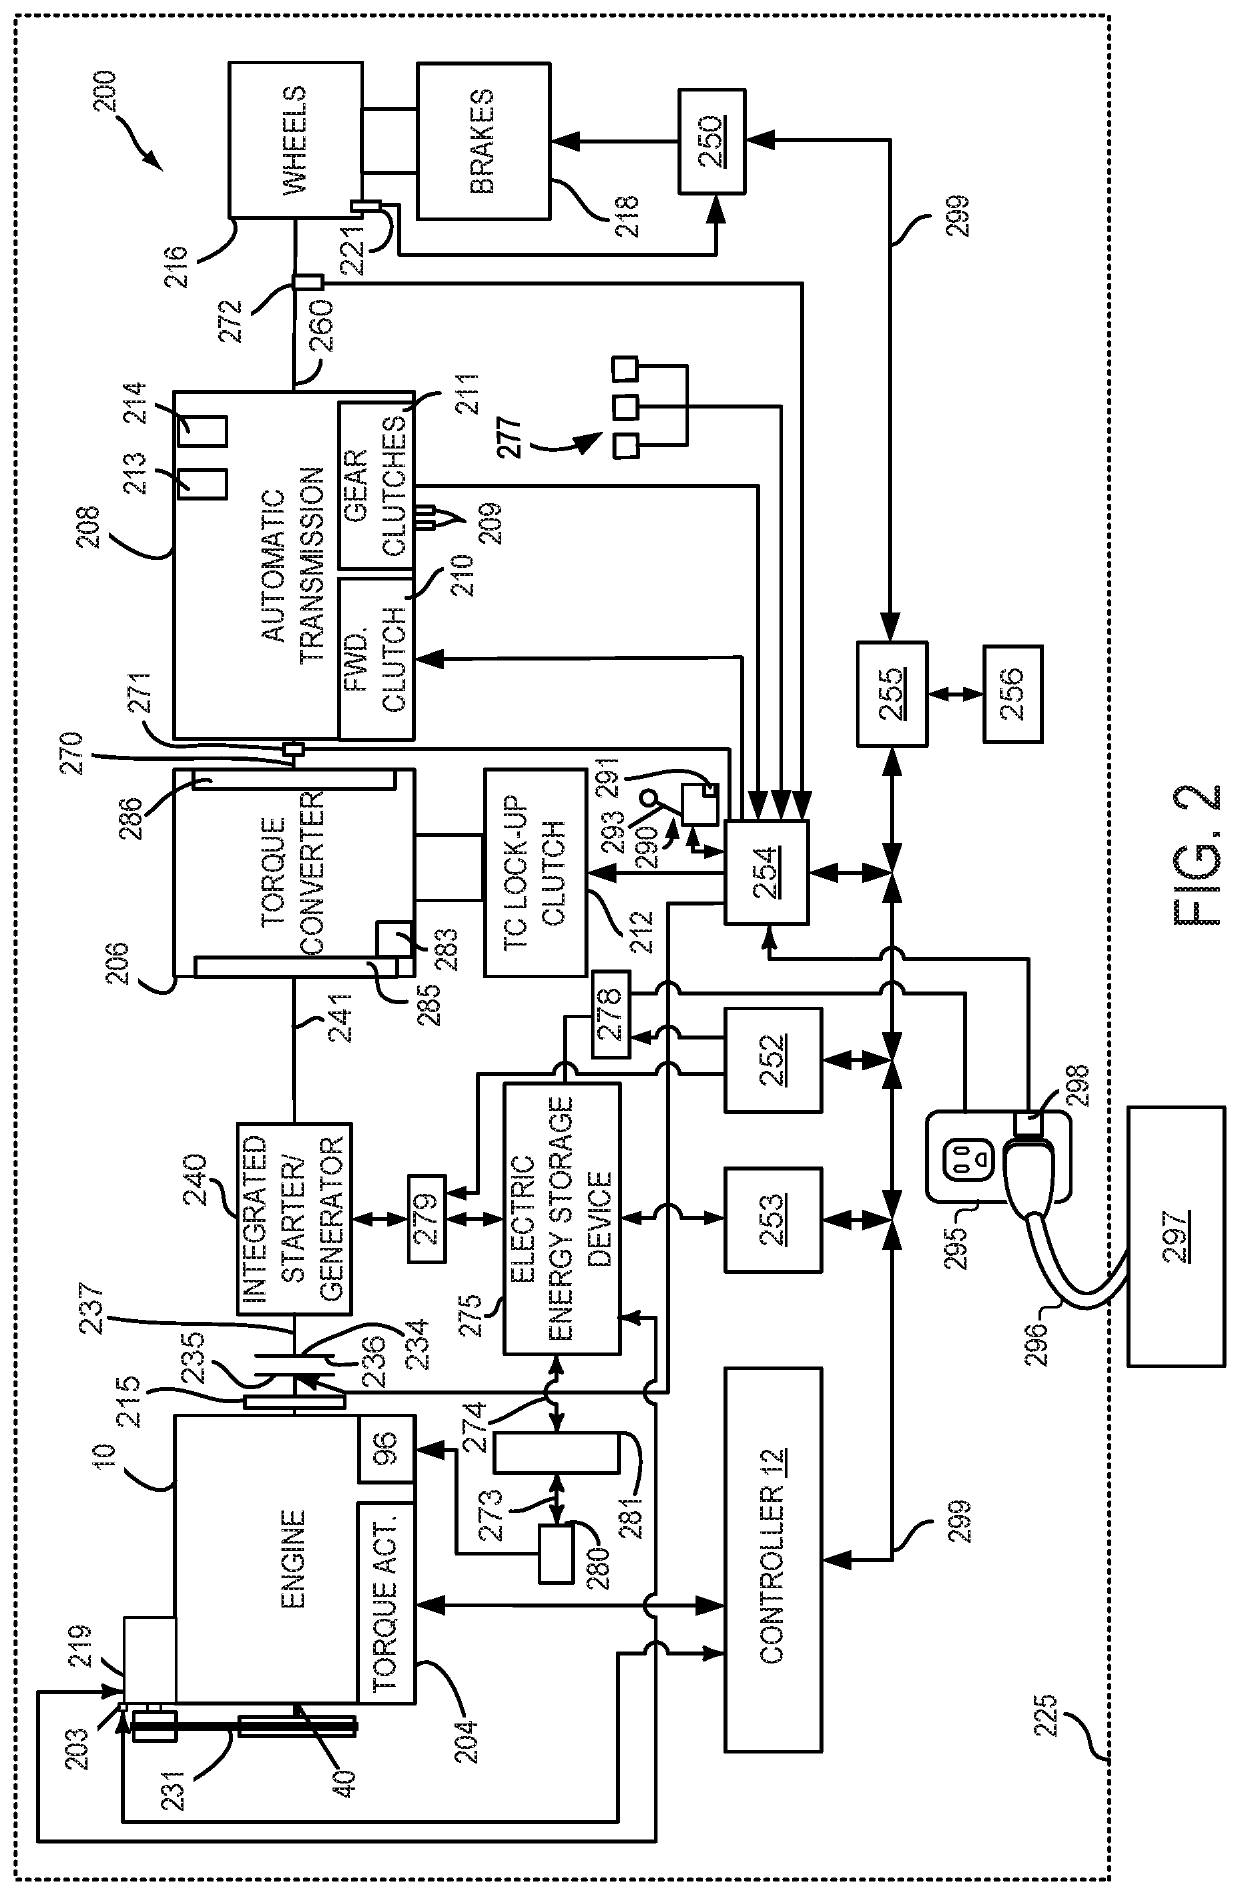 Method for operating a vehicle having an electrical outlet